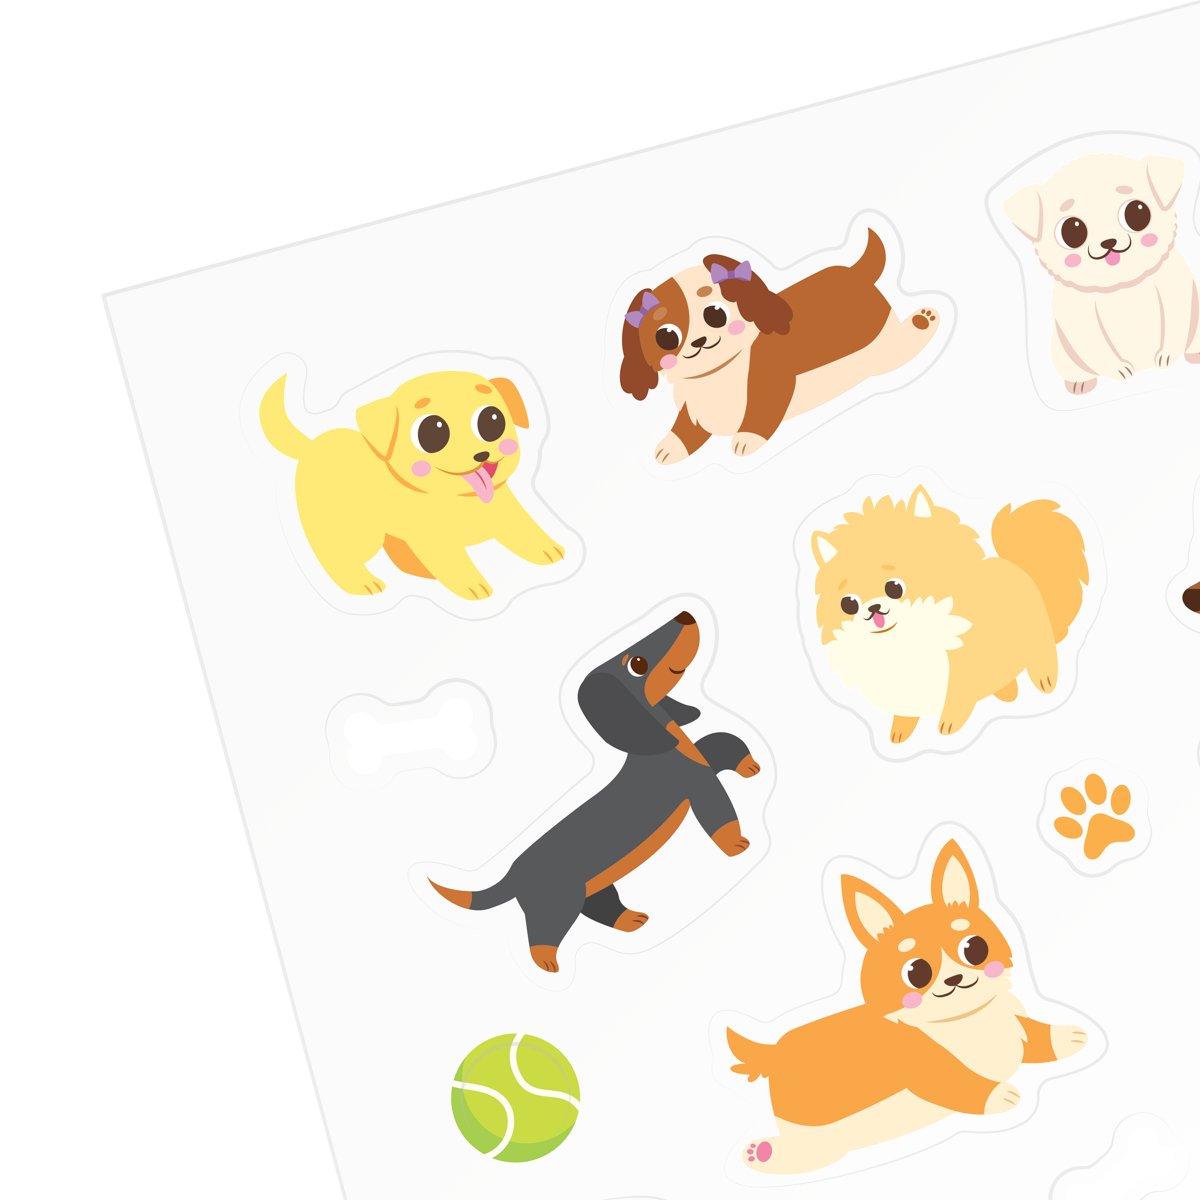 Stickiville Fun Flowers Stickers - Ooly